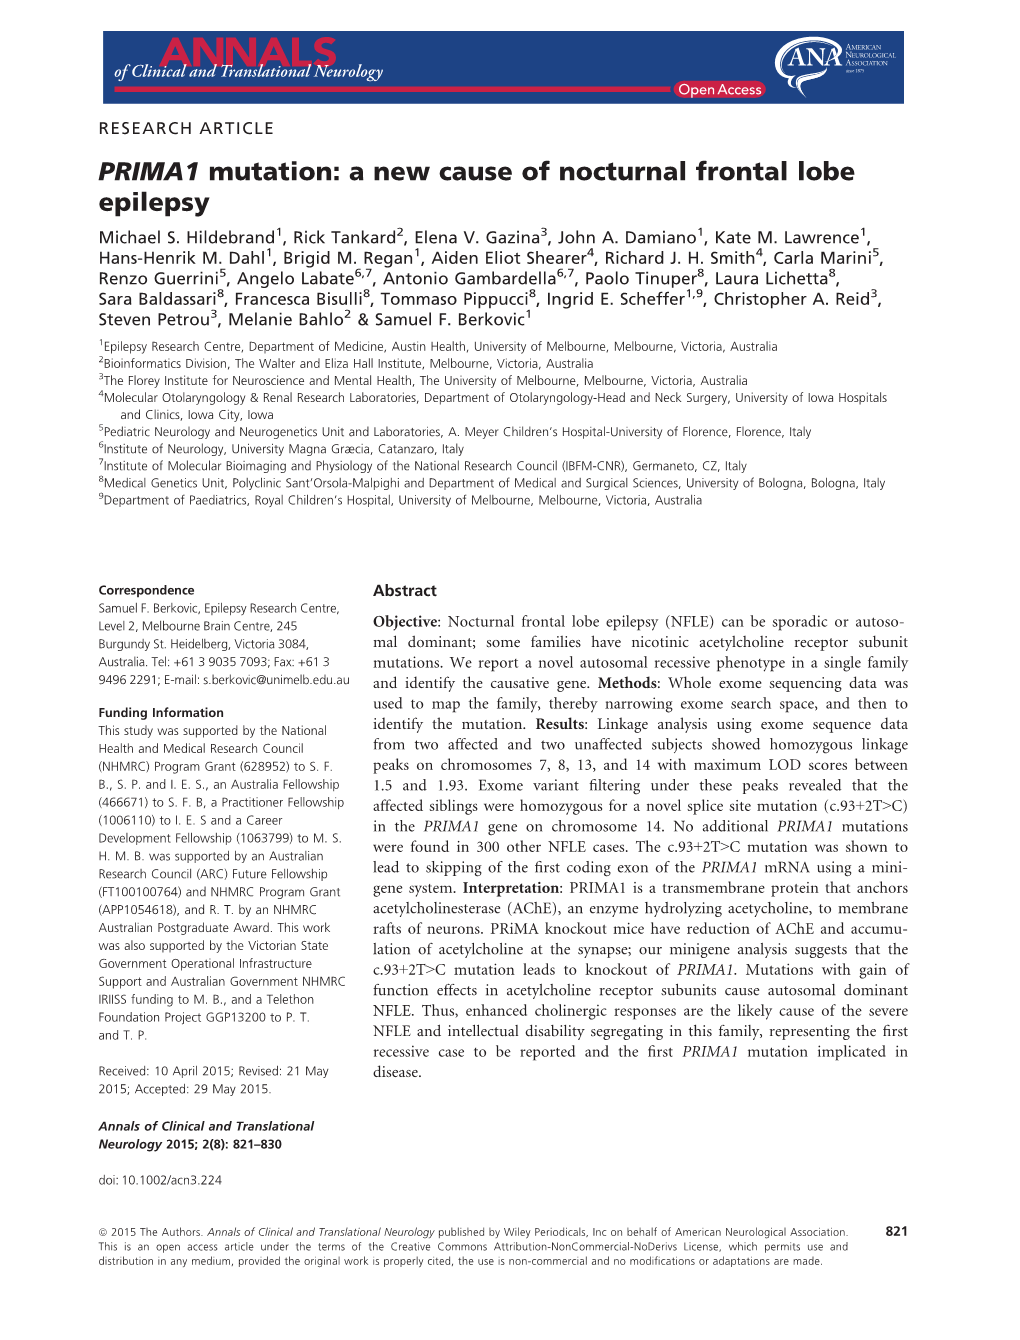 PRIMA1 Mutation: a New Cause of Nocturnal Frontal Lobe Epilepsy Michael S